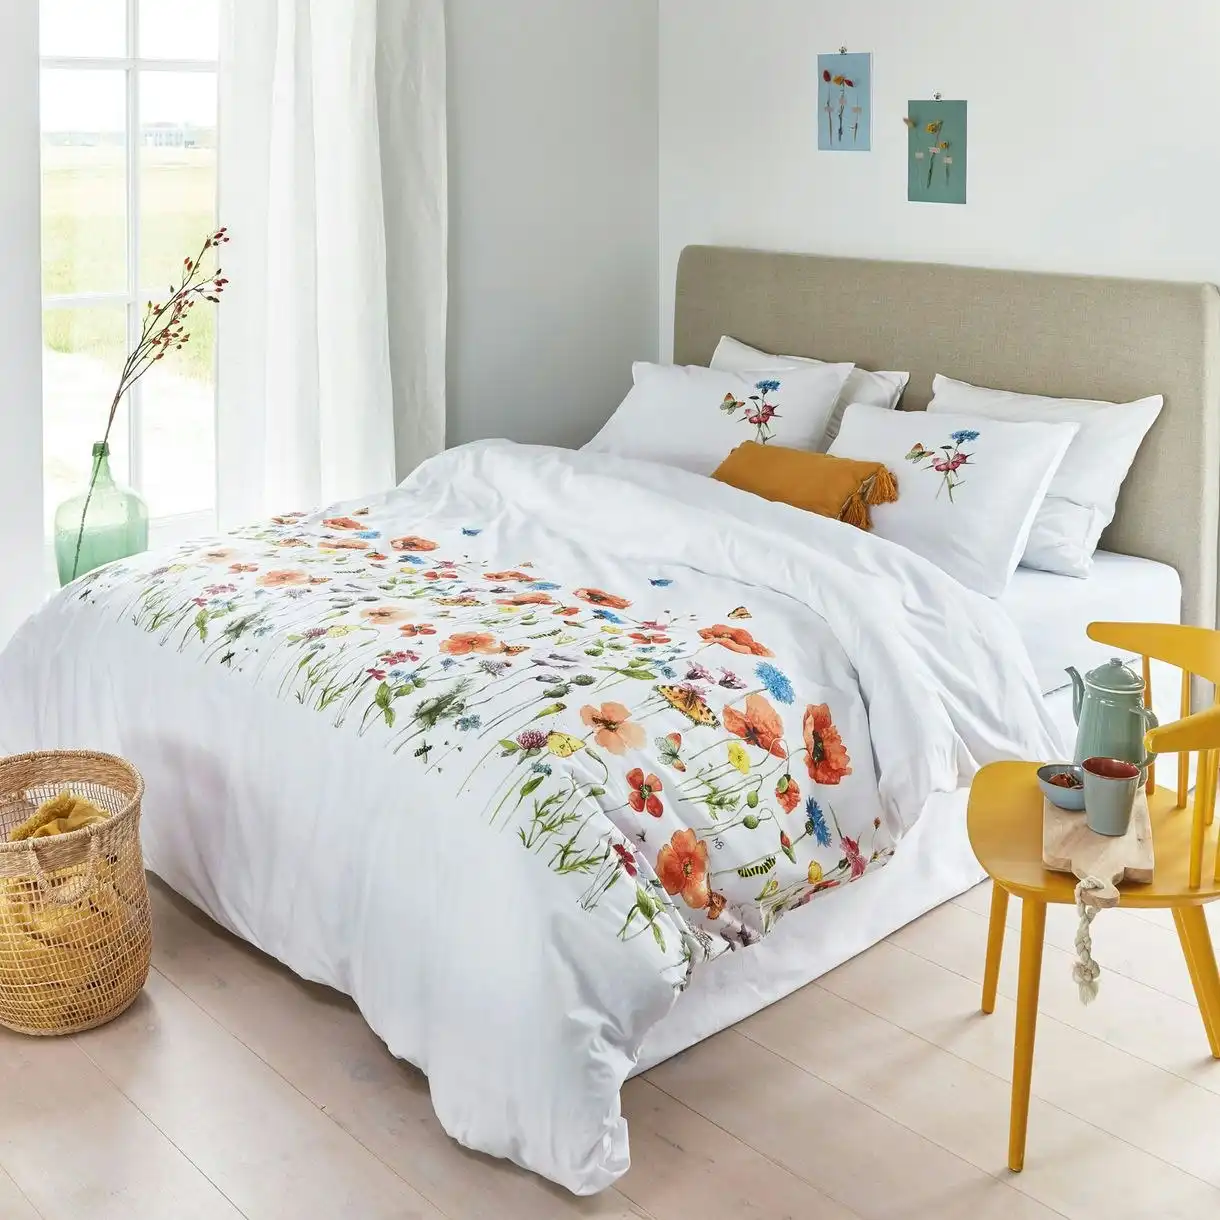 Bedding House Poppy Parade Marjolein Bastin Cotton Quilt Cover Sets